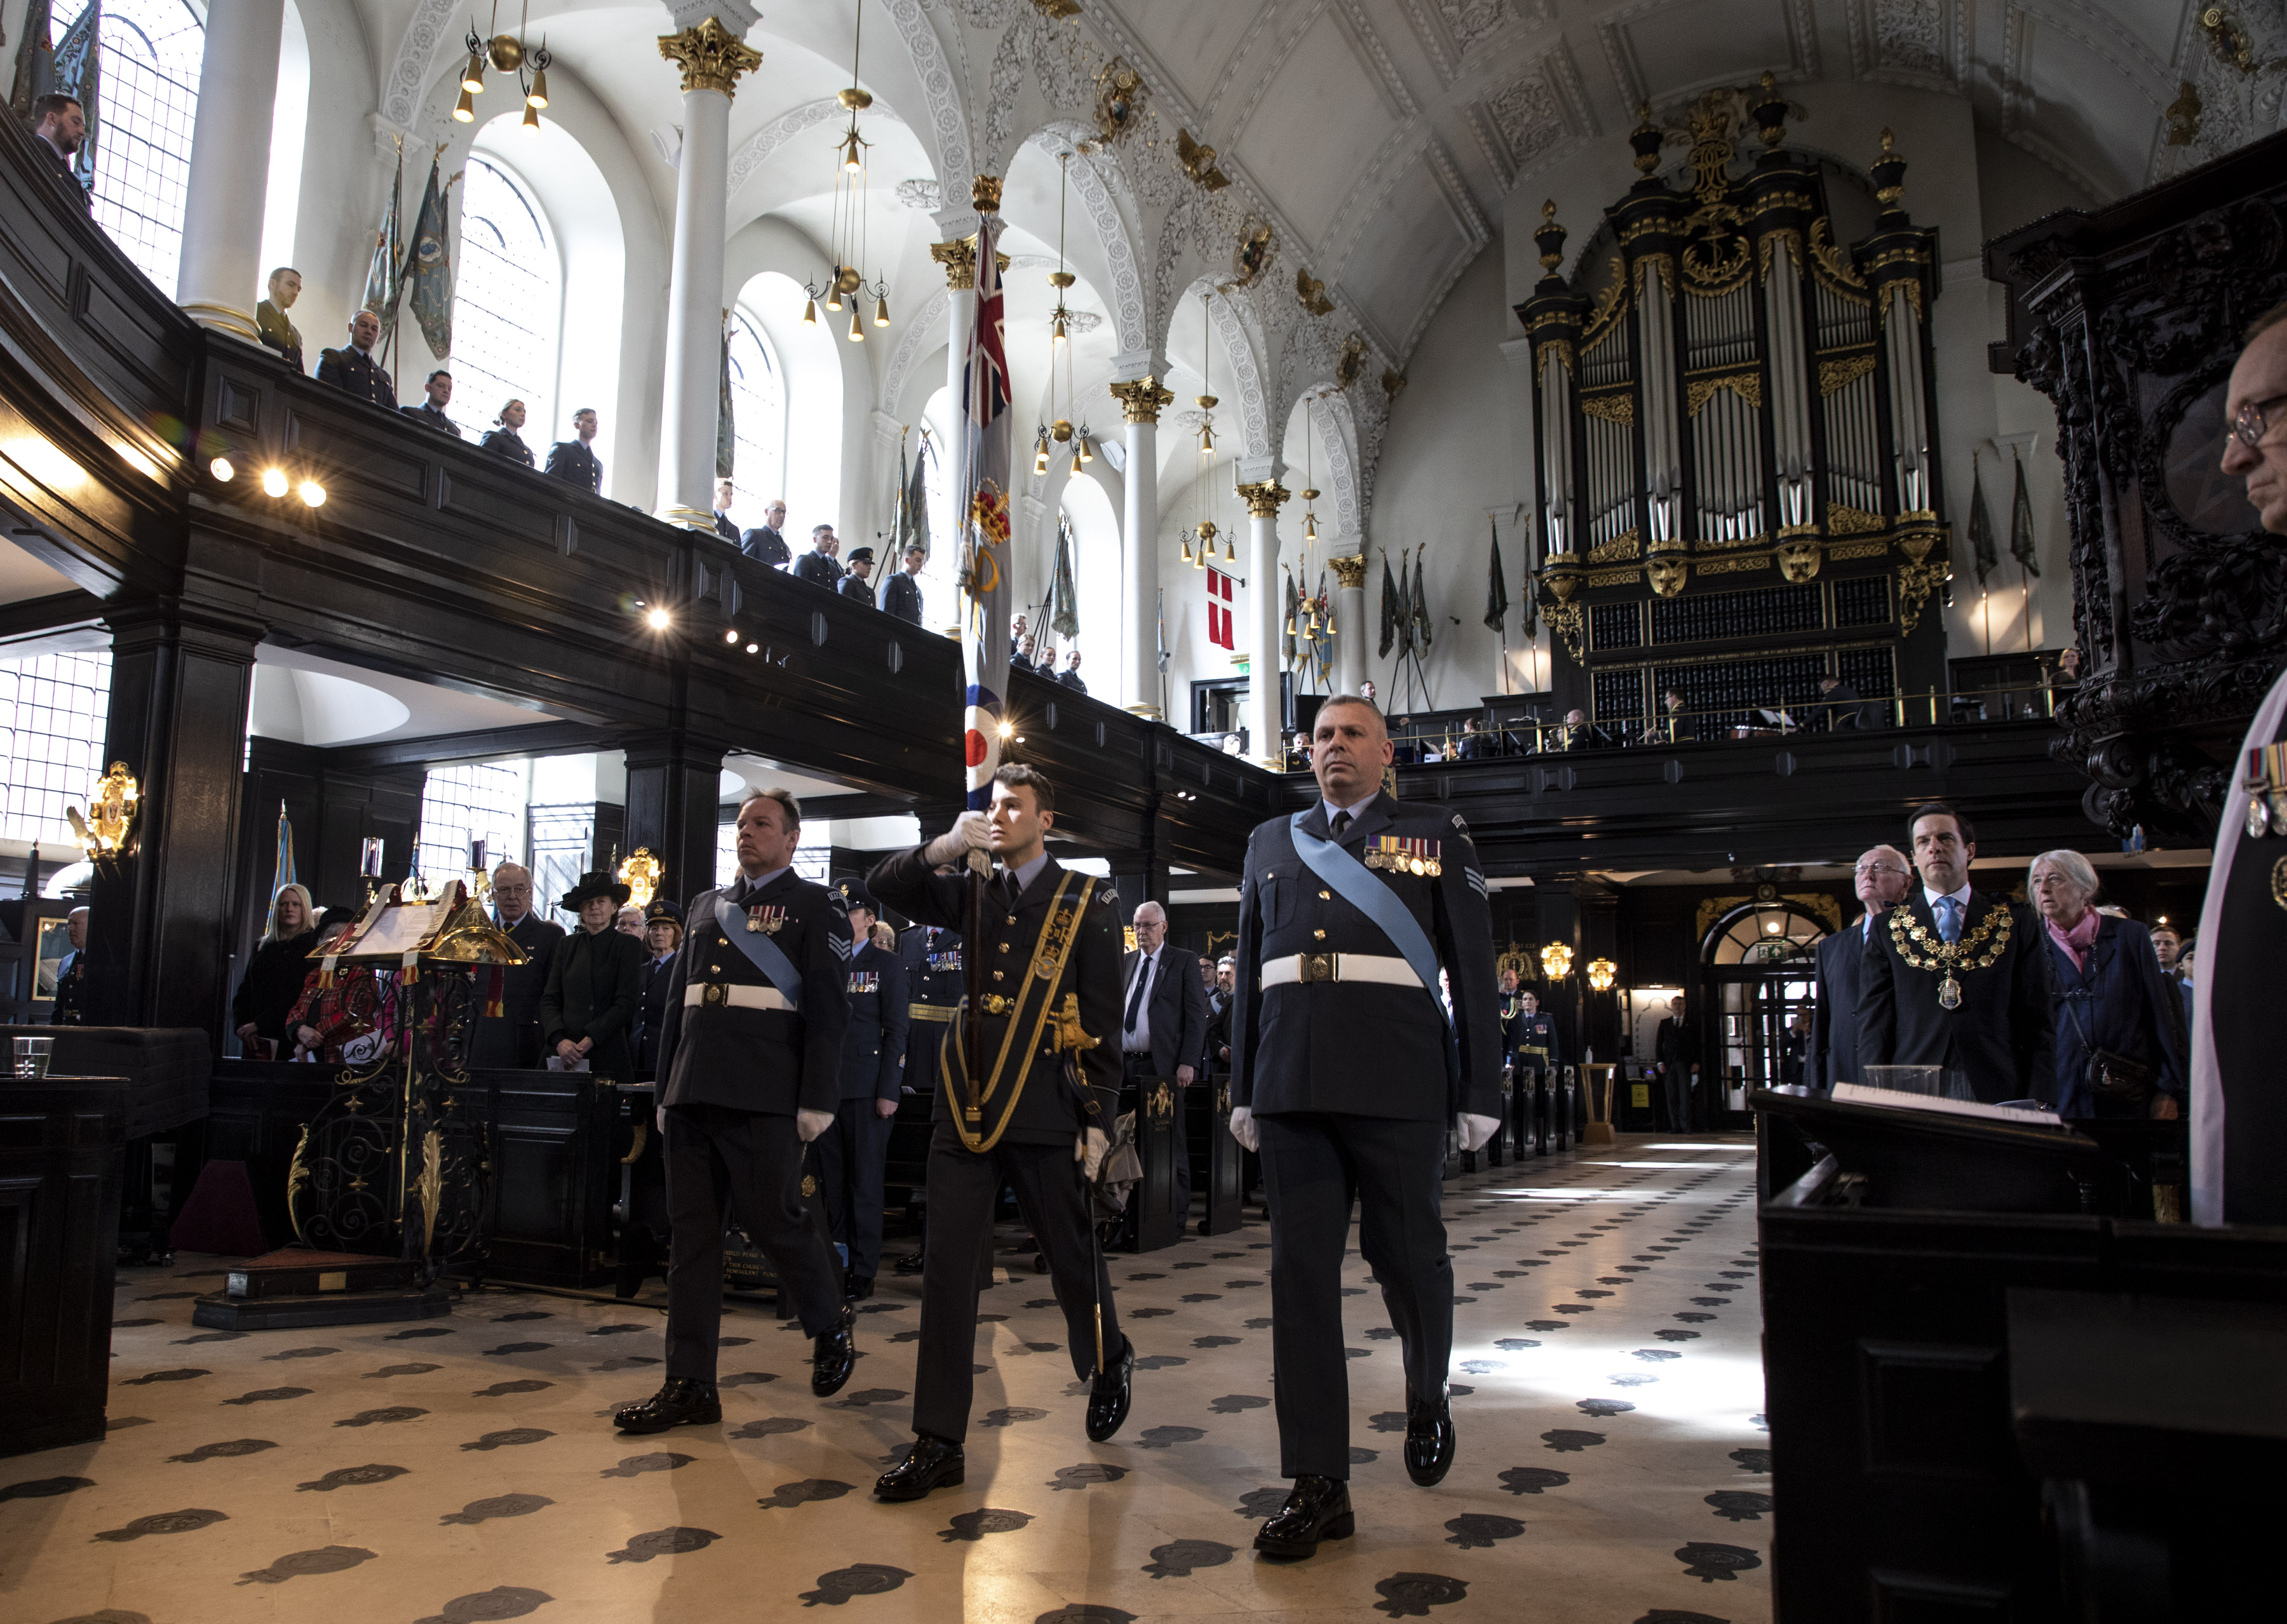 Personnel inside the church perform the service.